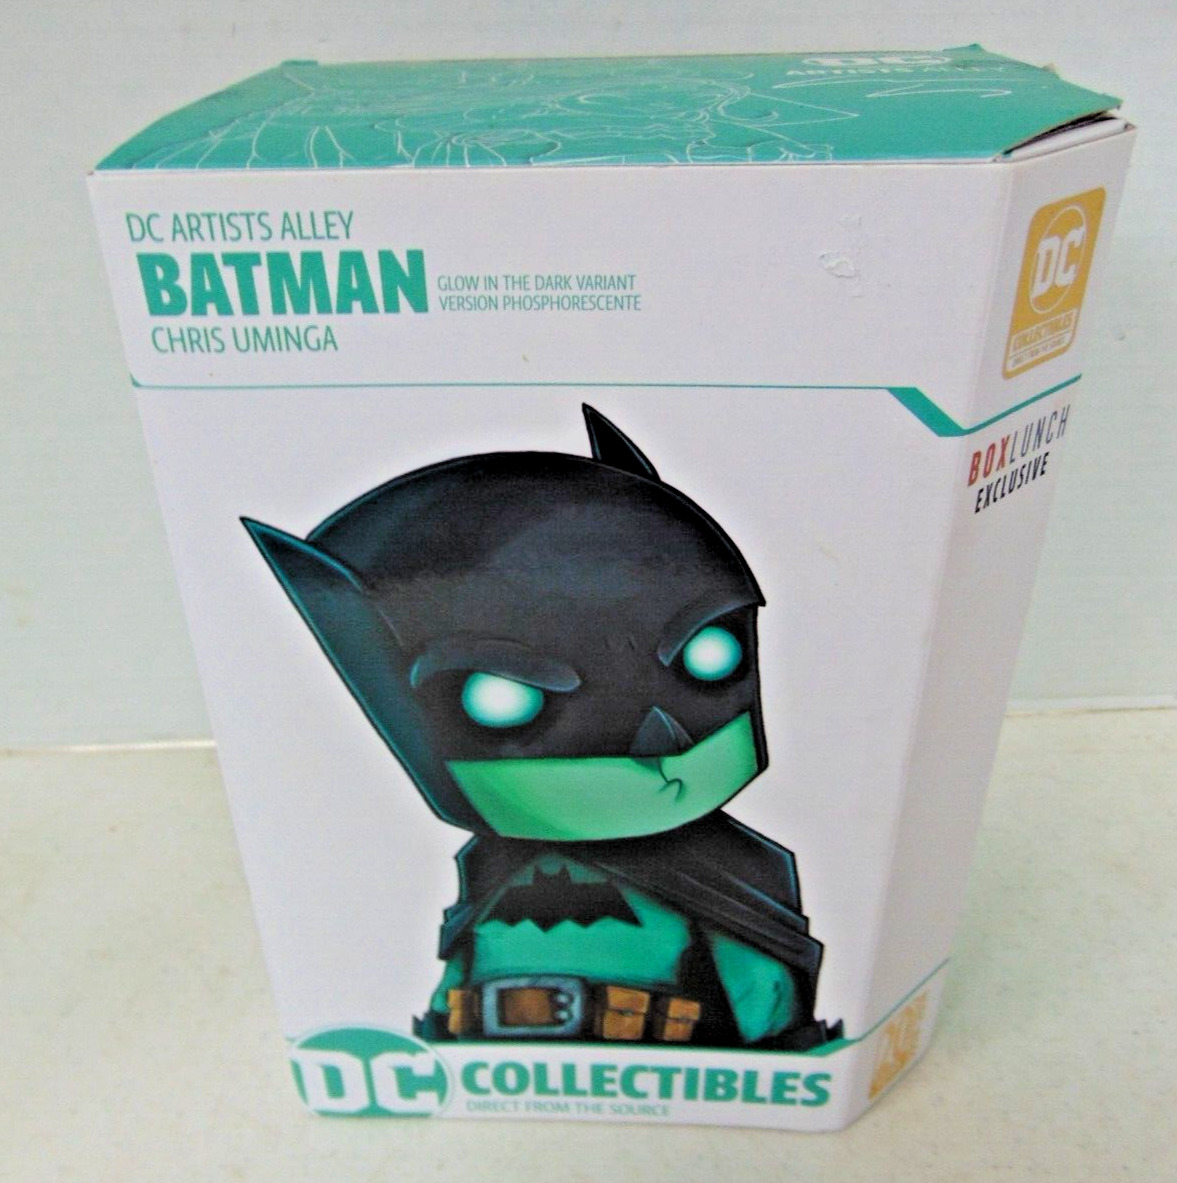 DC Collectibles DC Artists Alley: Batman By Chris Uminga Statue Glow In The Dark